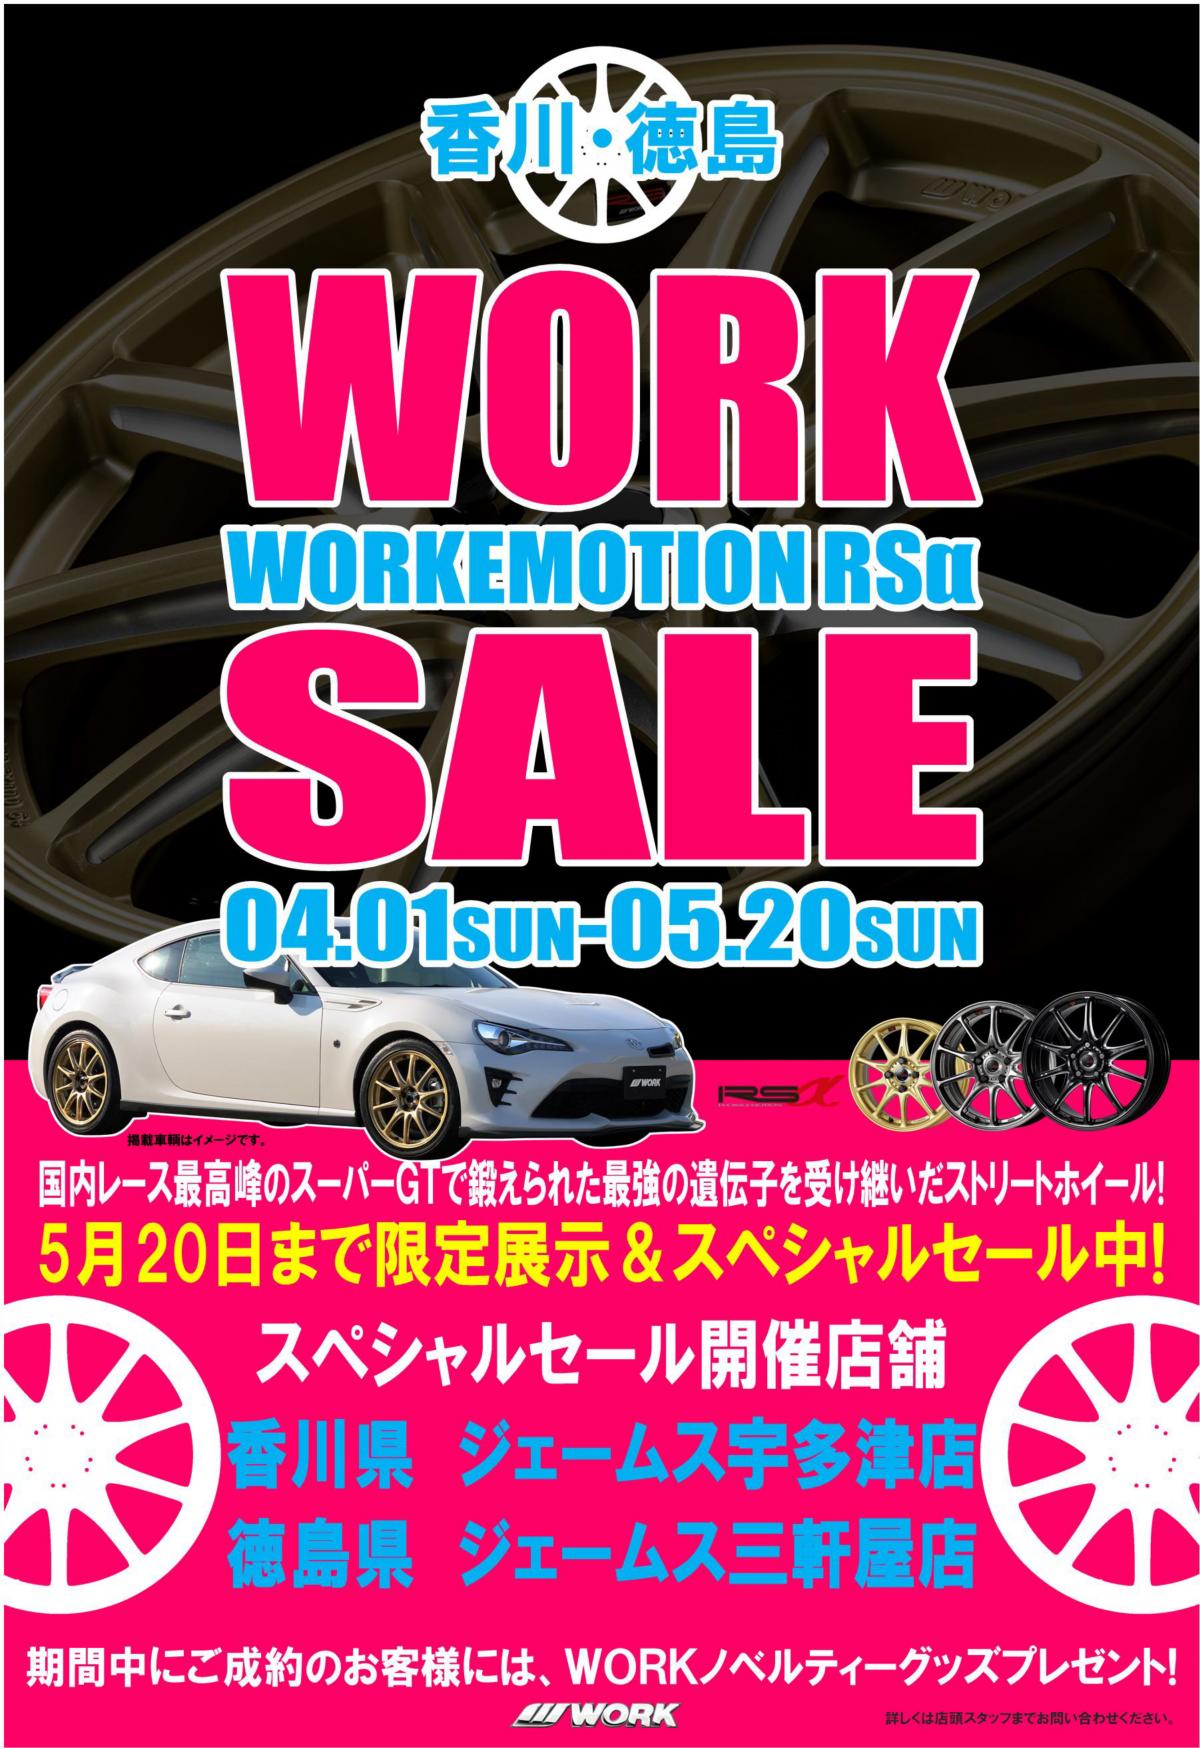 【Tokushima Prefecture】 WORK SPECIAL SALE